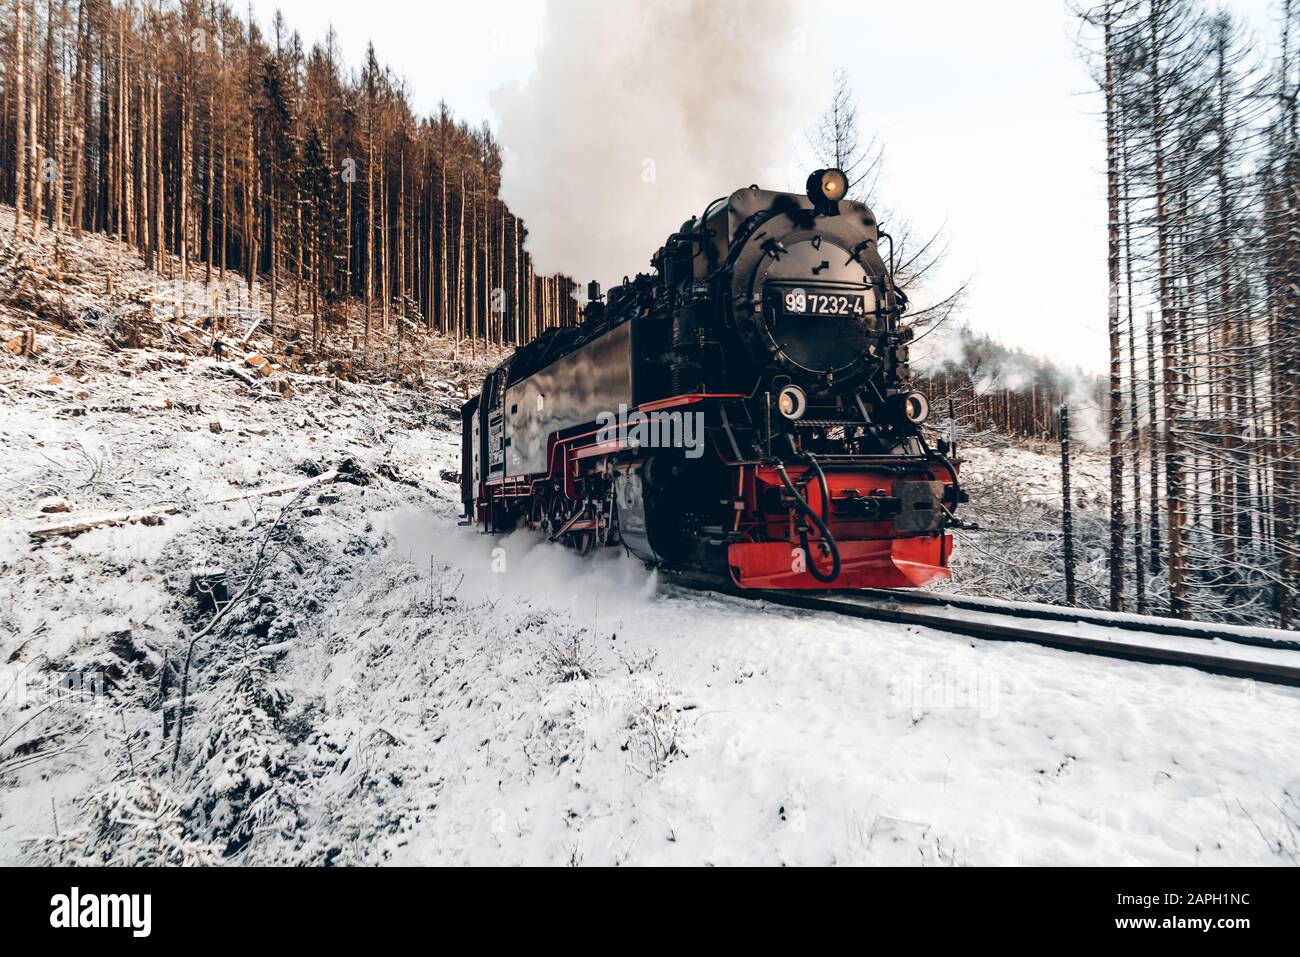 The historic steam locomotive association fights its way up the mountain in the snow Stock Photo